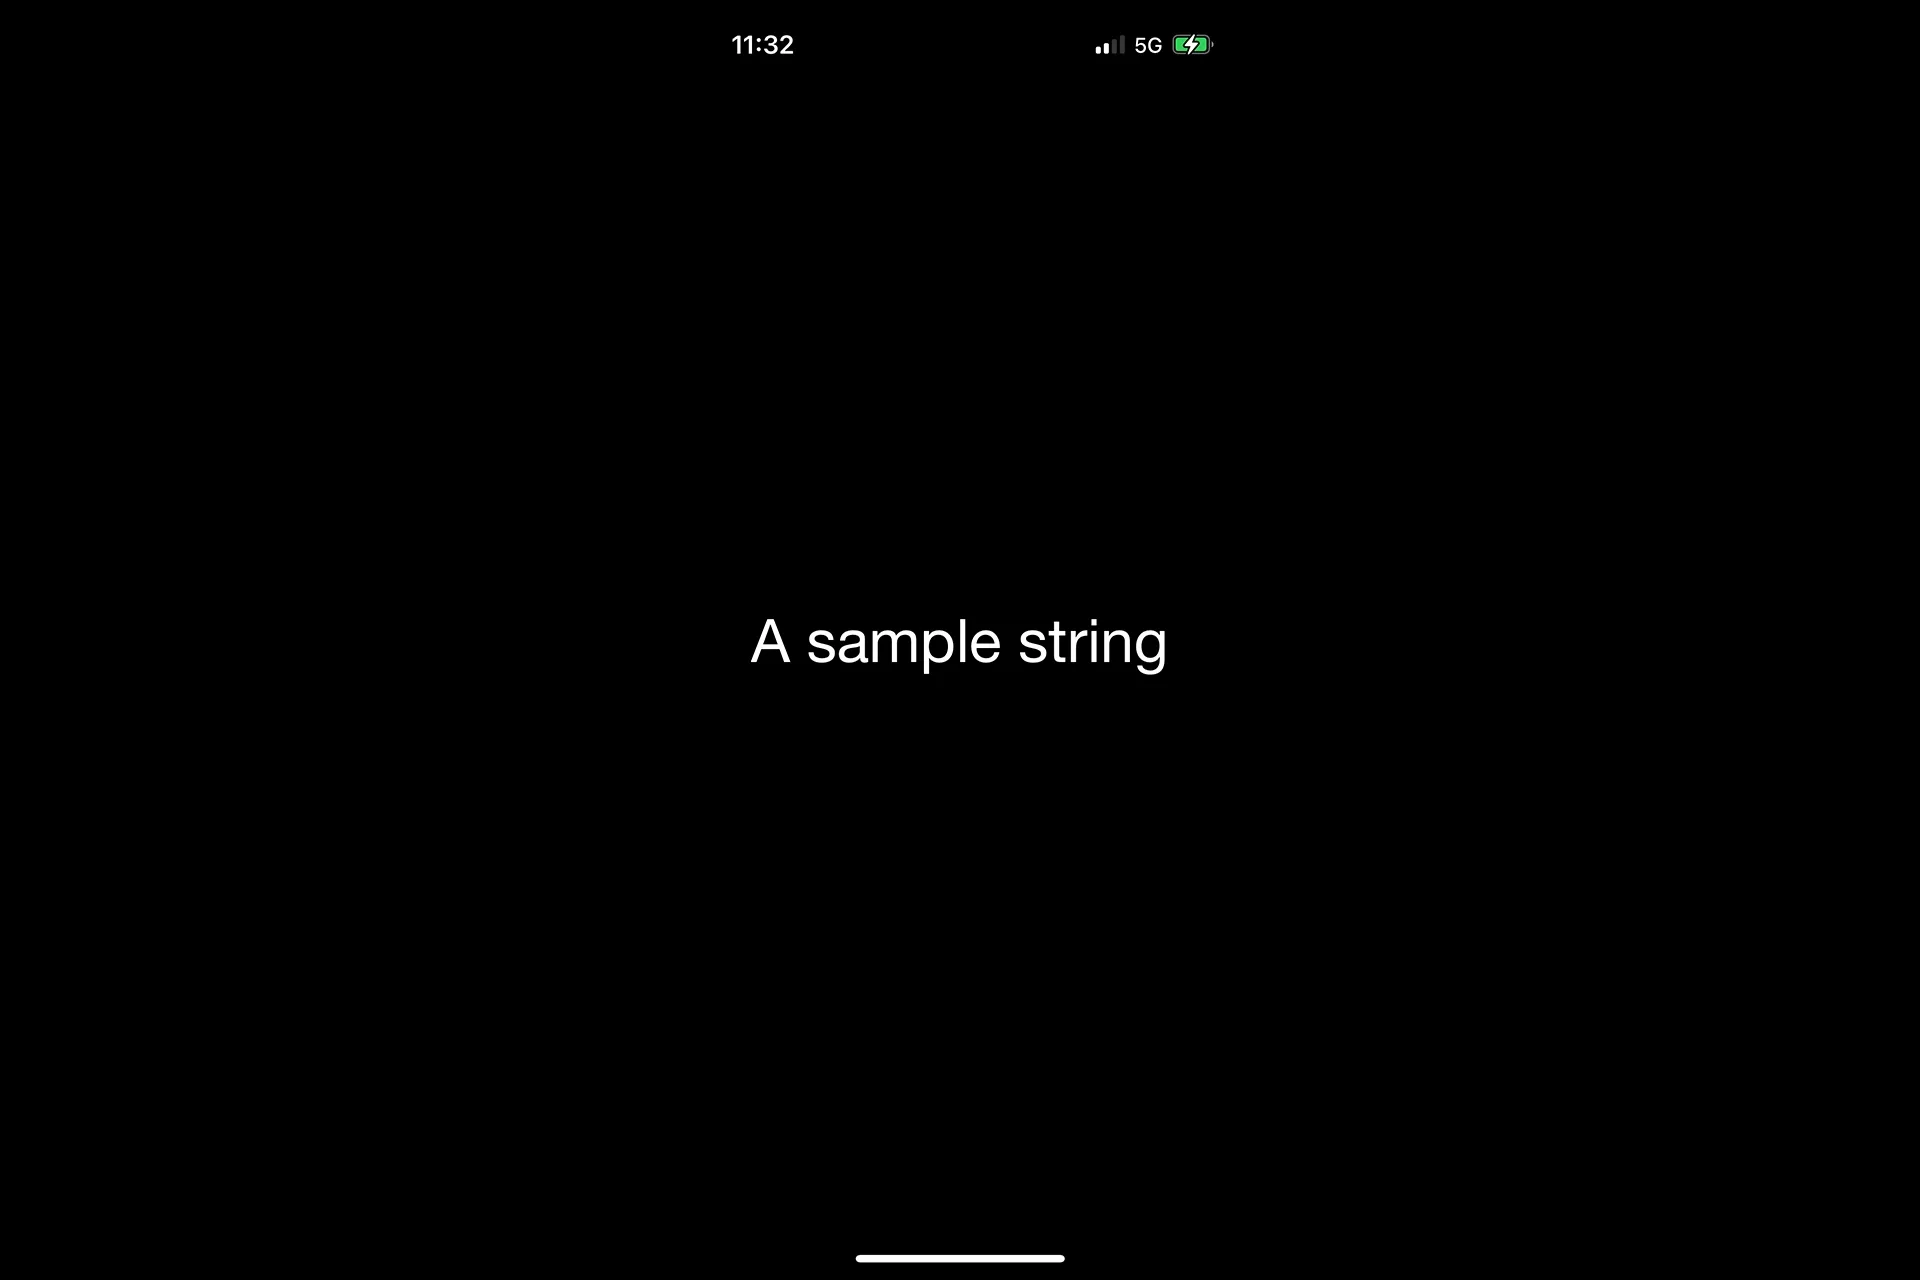 A screenshot of our app showing the string